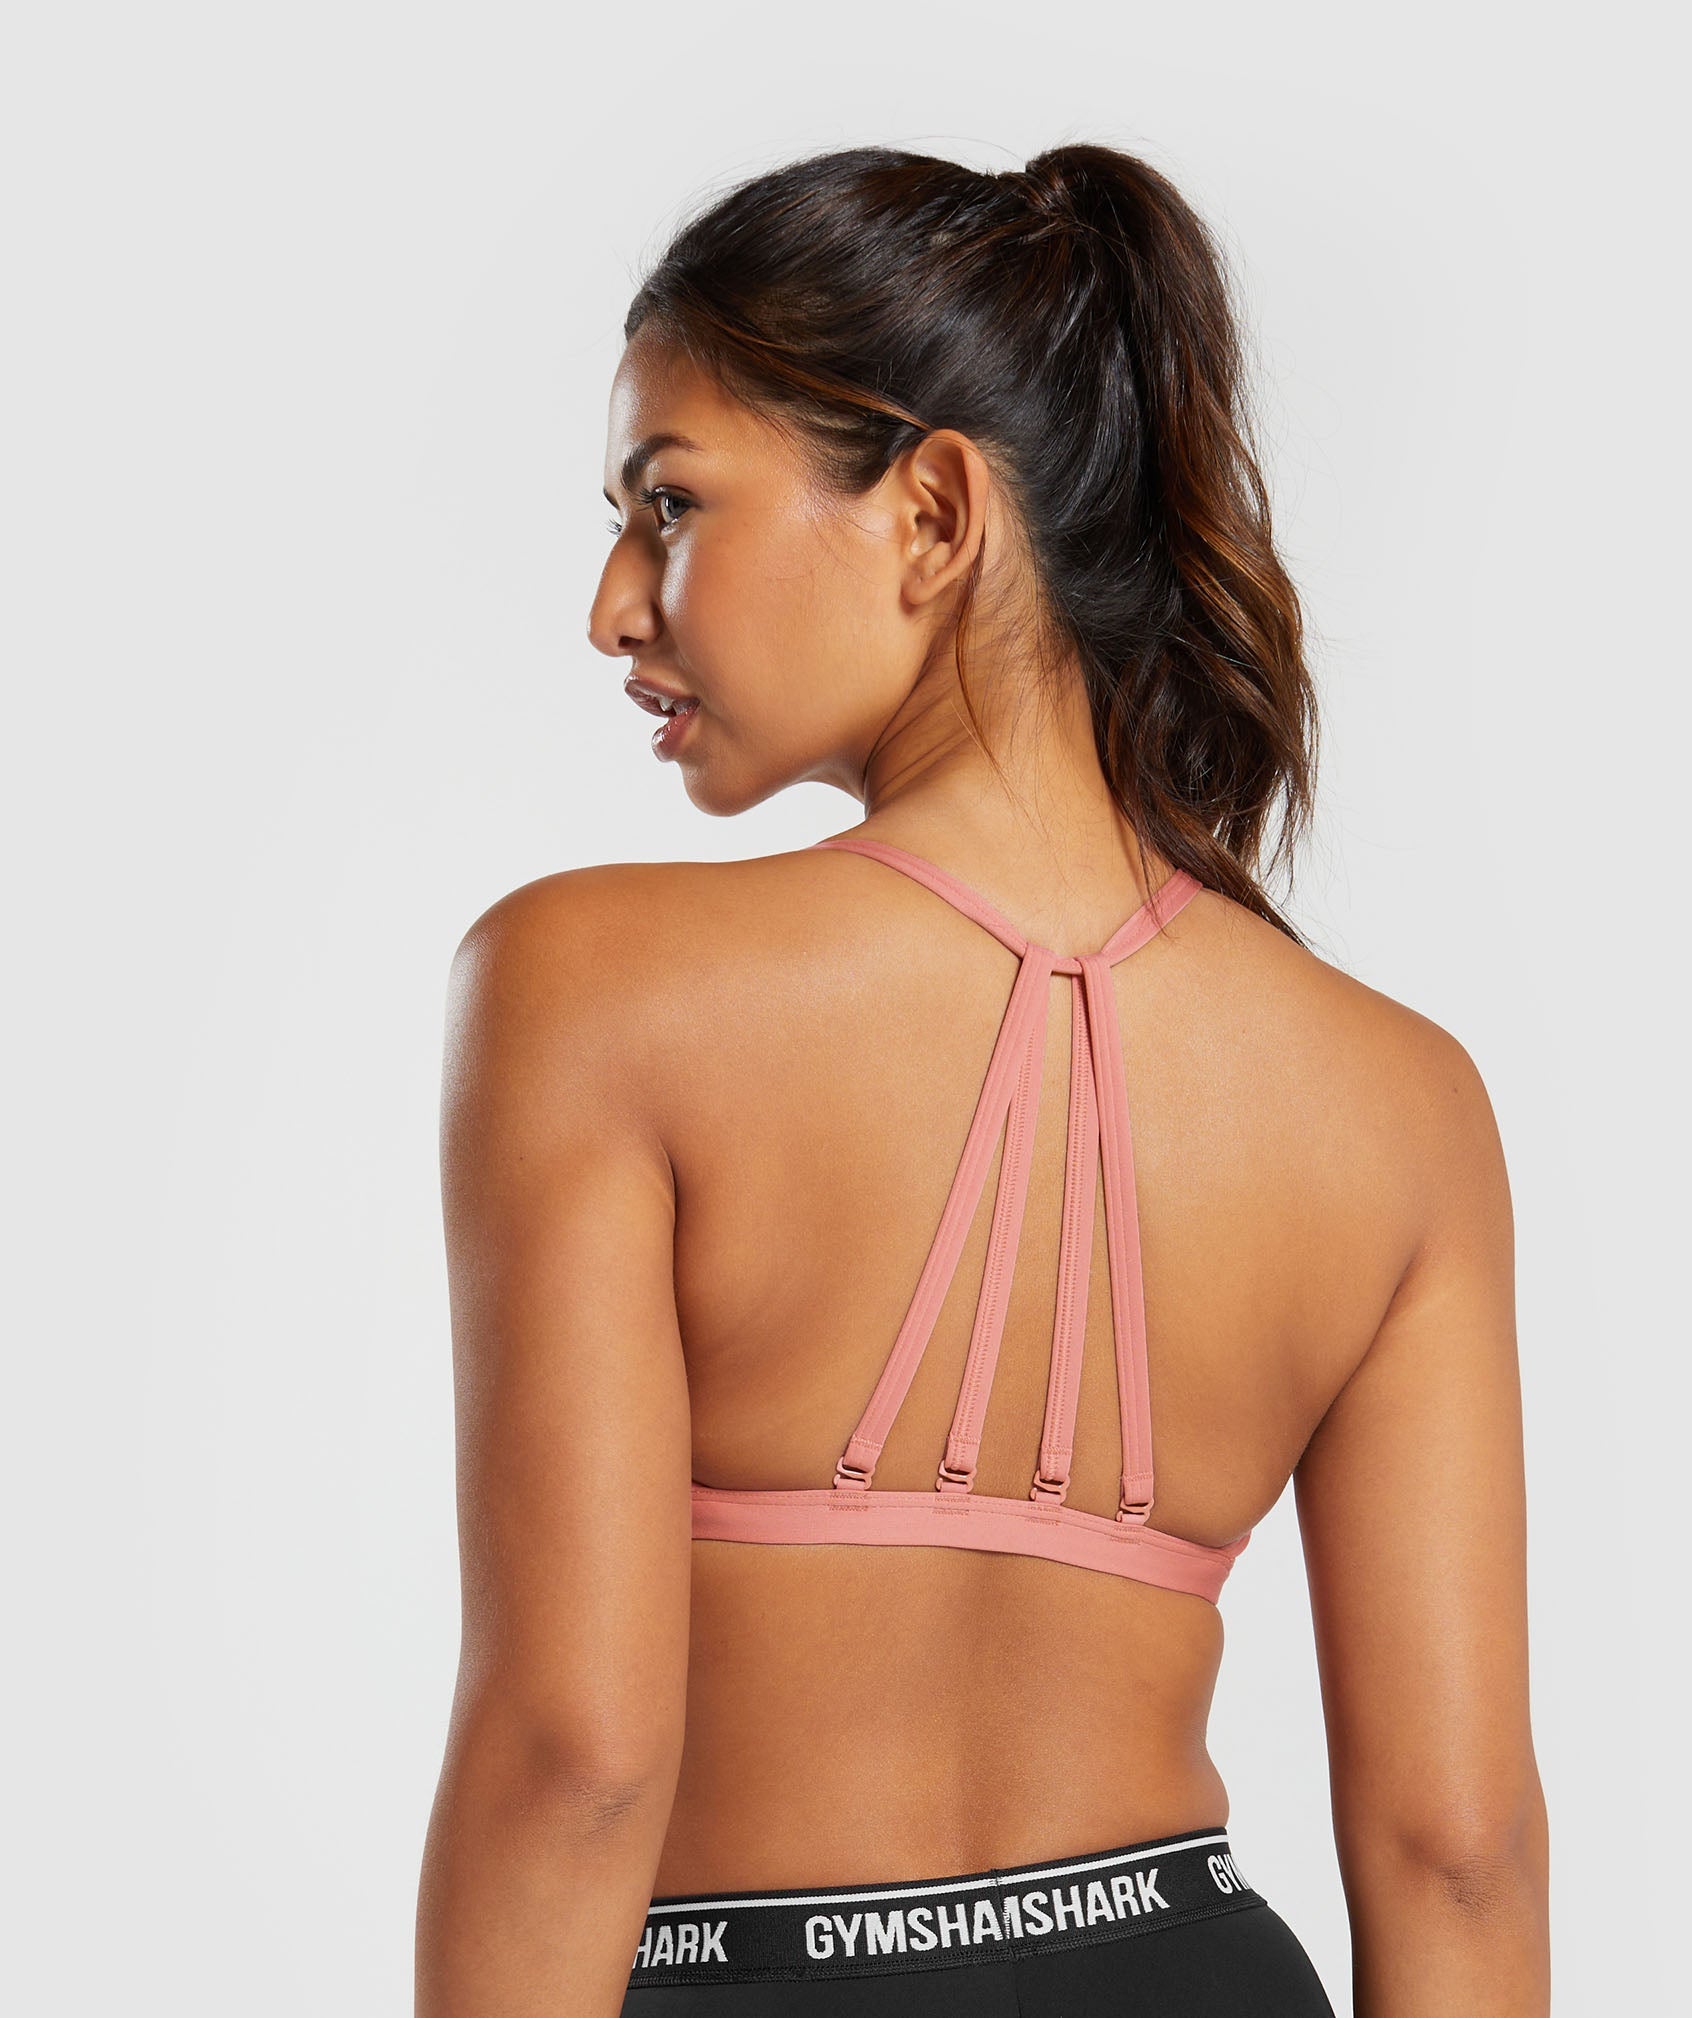 Minimal Sports Bra in White/Classic Pink - view 2